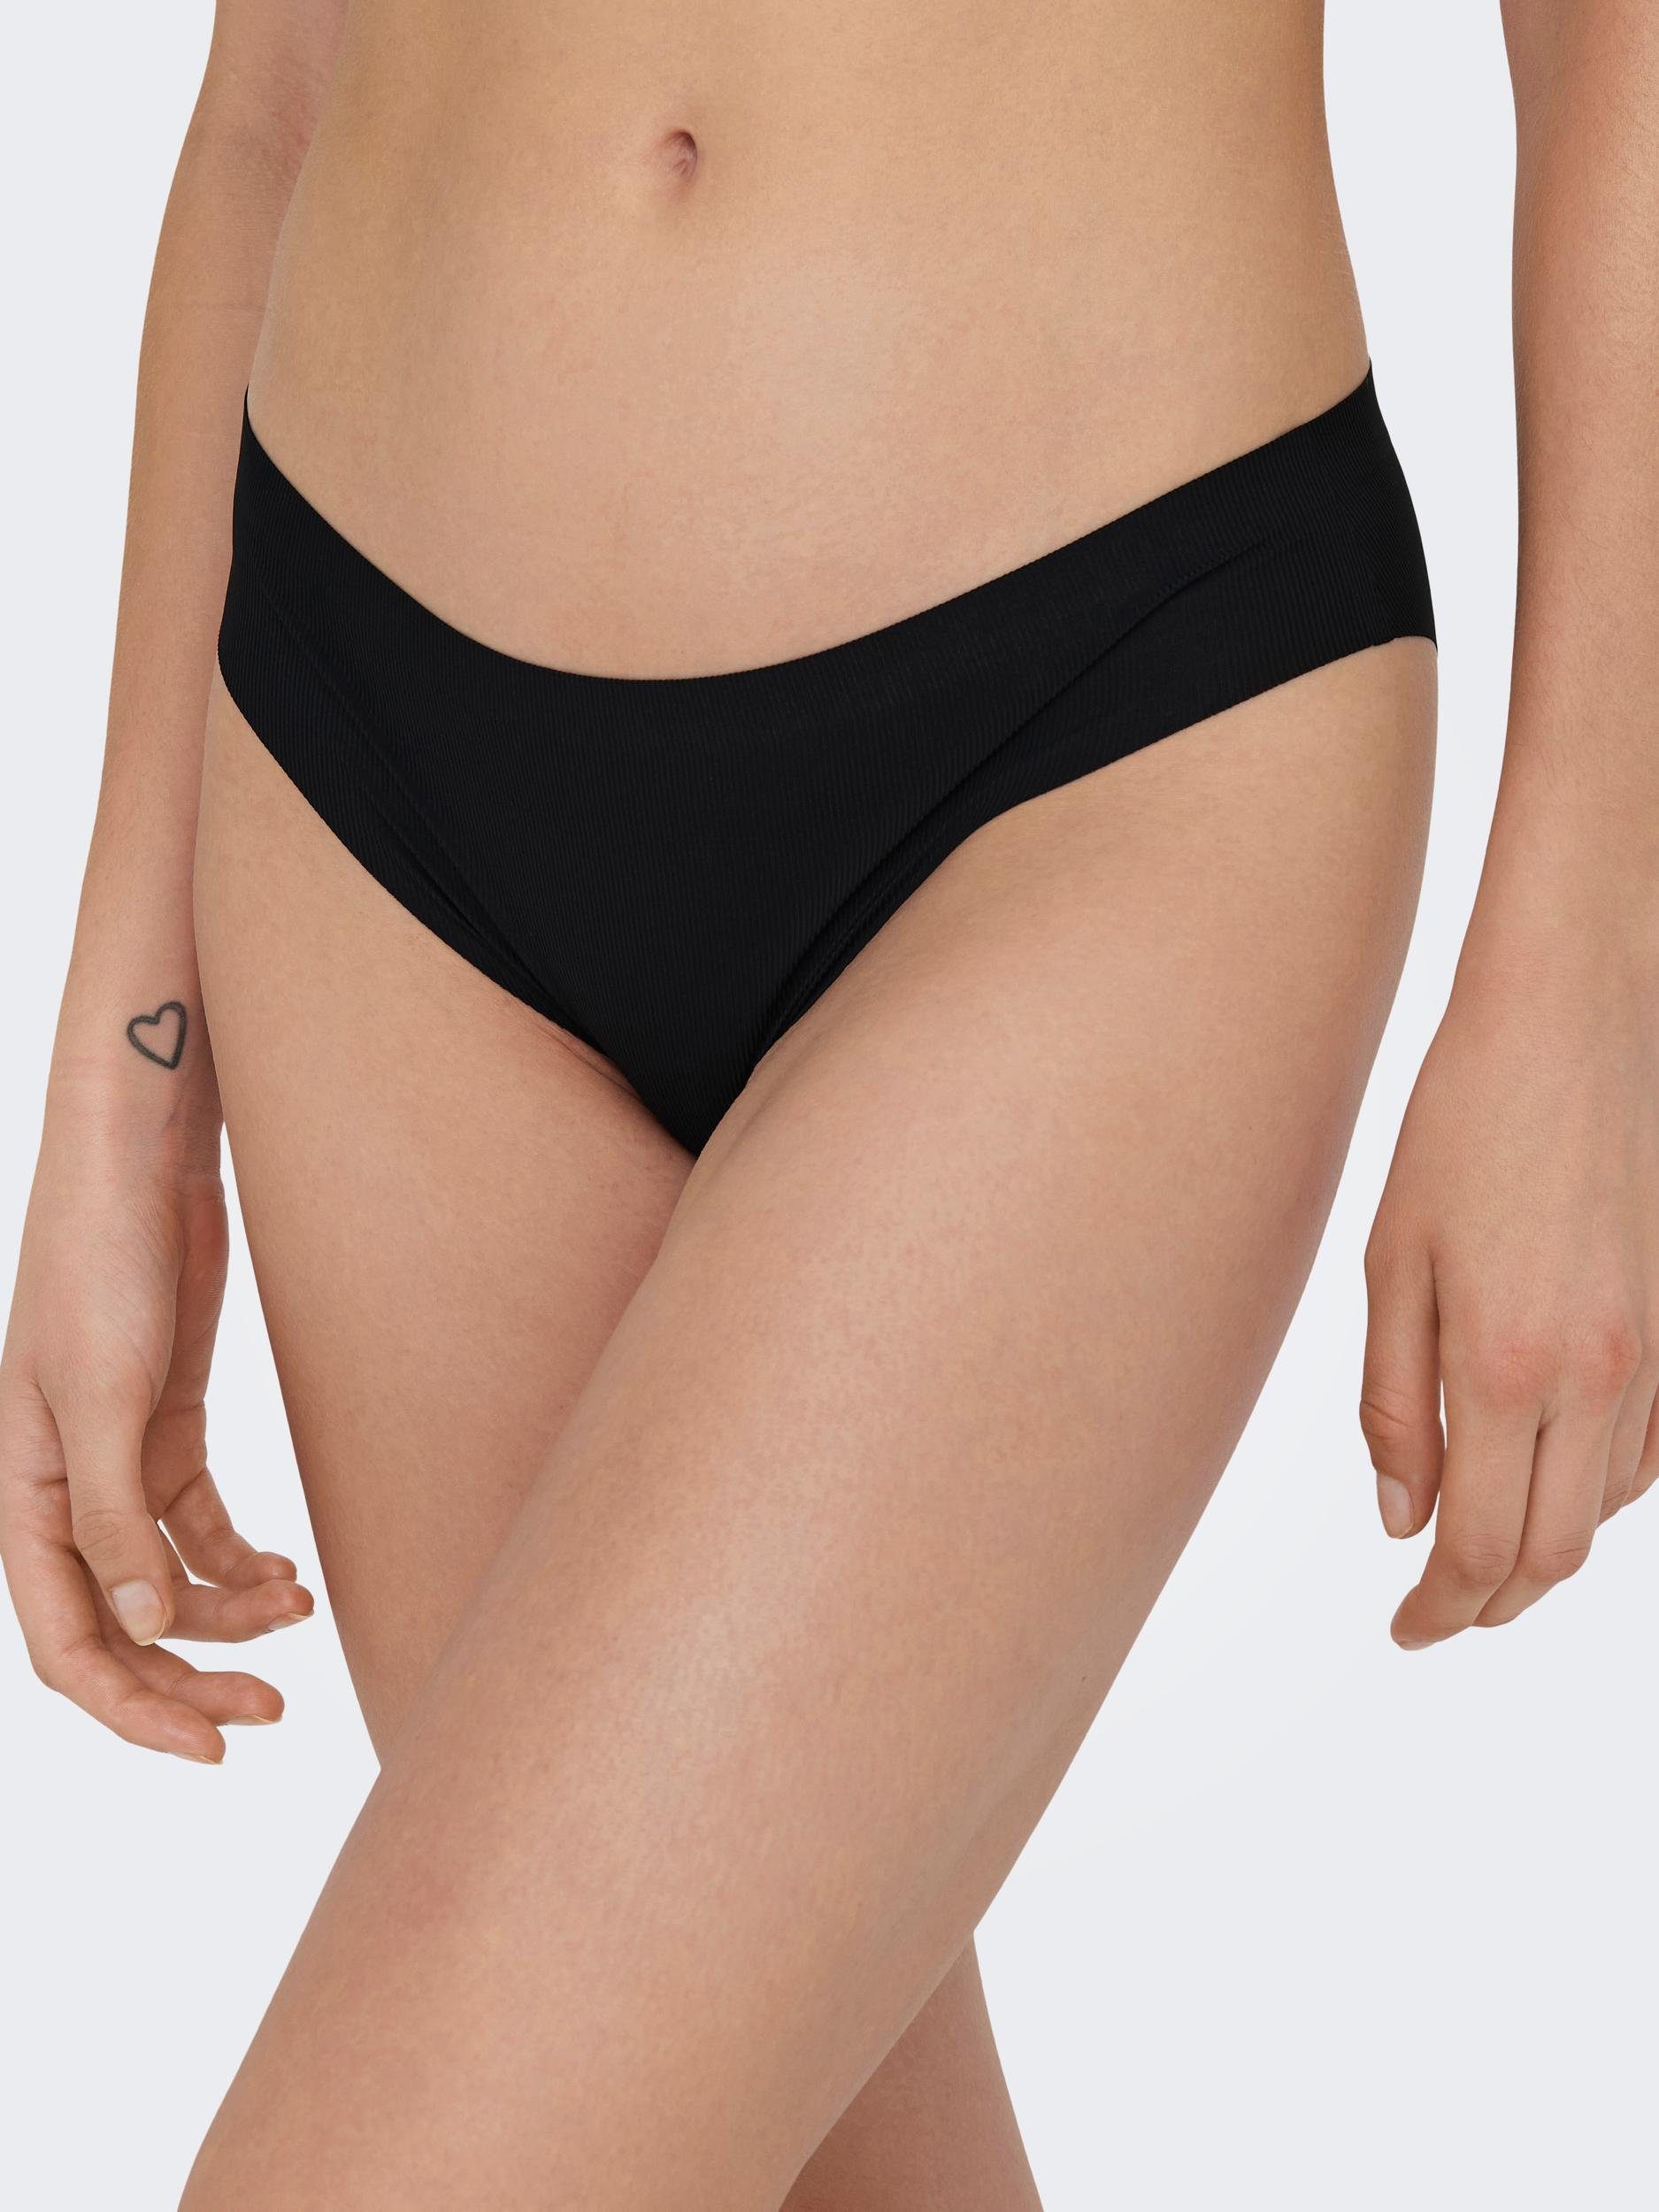 ONLY Slip INVISIBLE 3-PACK Black 3-St) BRIEF ONLTRACY (Set, RIB